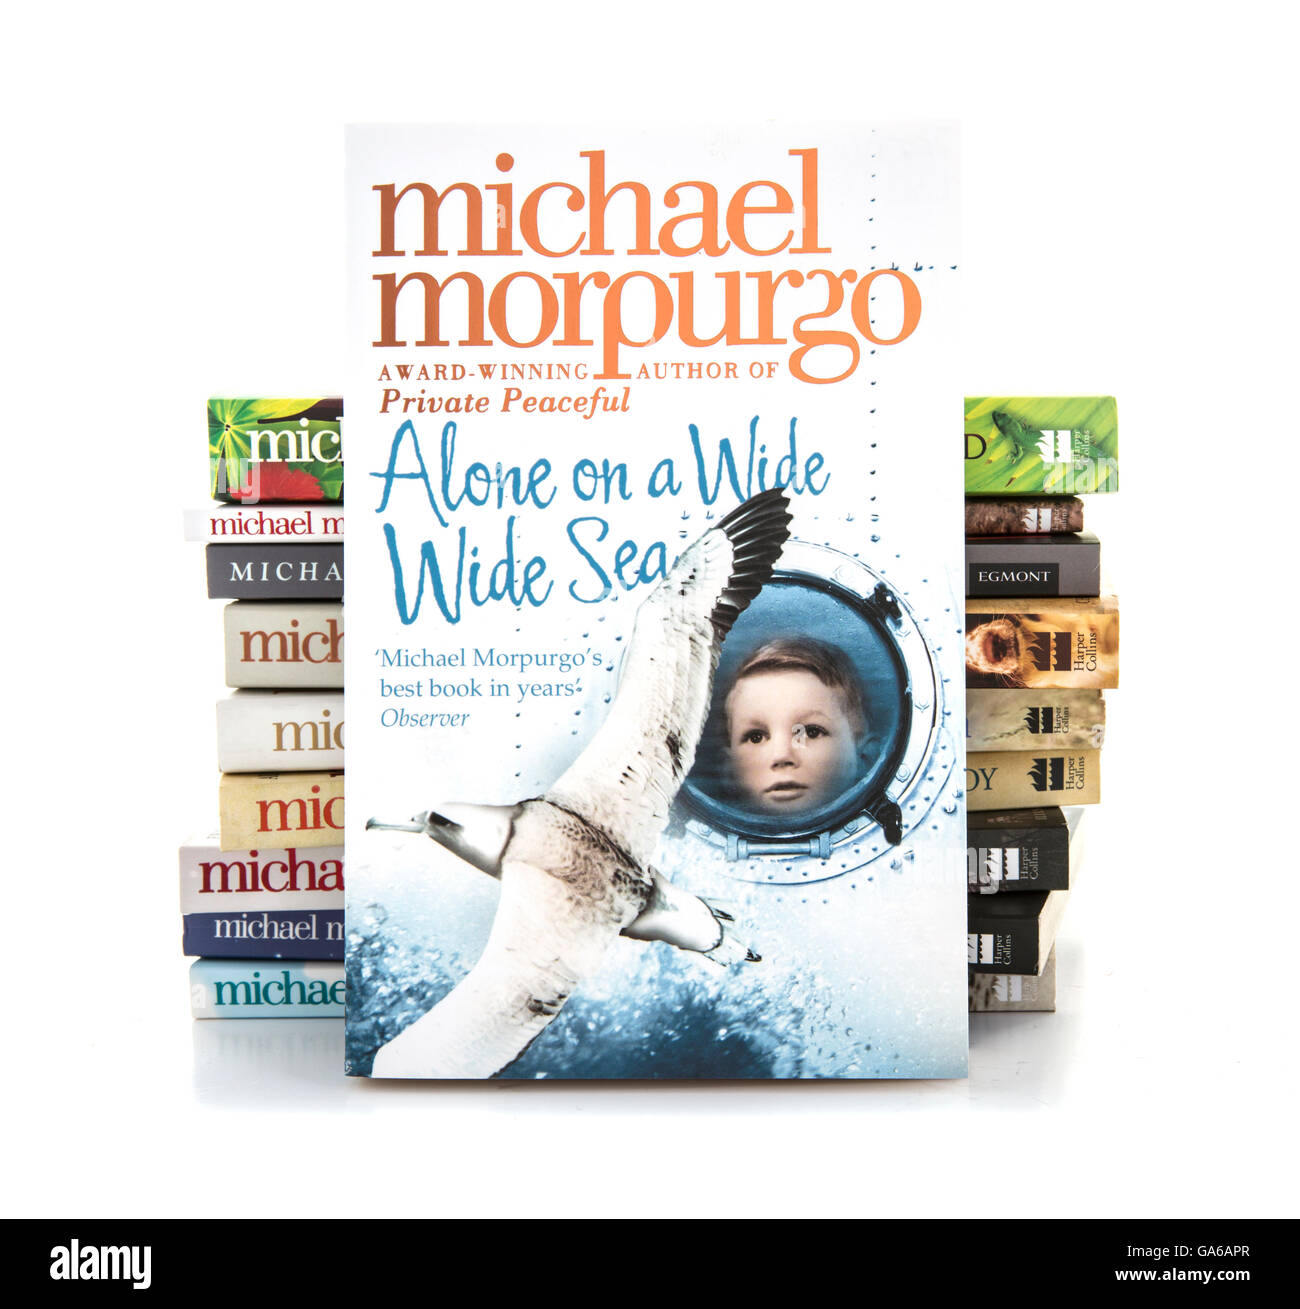 Alone on a Wide Wide Sea by Michael Morpurgo on a white background Stock Photo